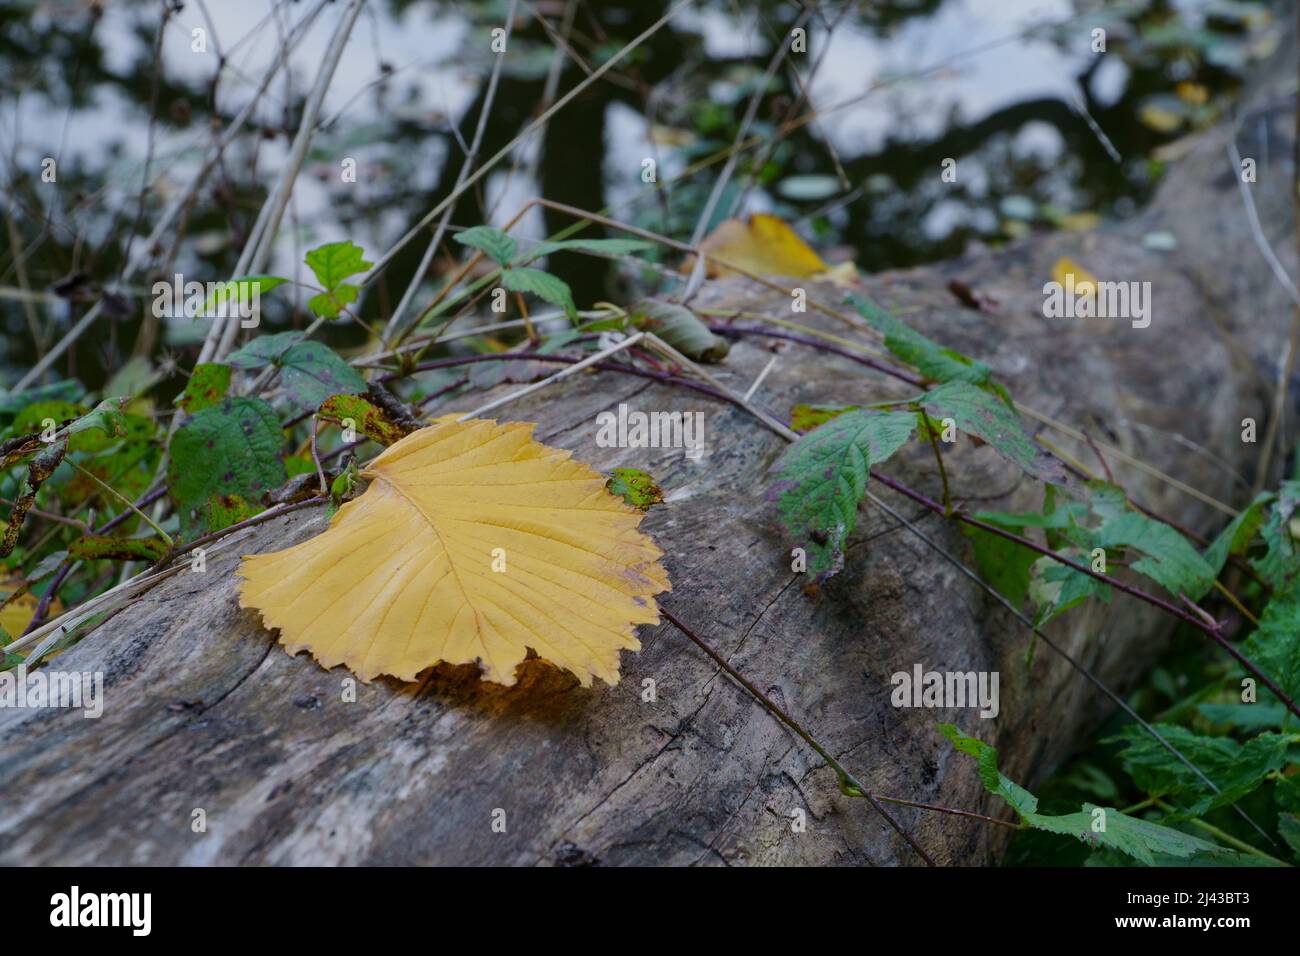 The yellow leaf on the fallen dry wood trunk in autumn. A close-up view. Fall season abstract symbol near the waters in wild nature. Stock Photo